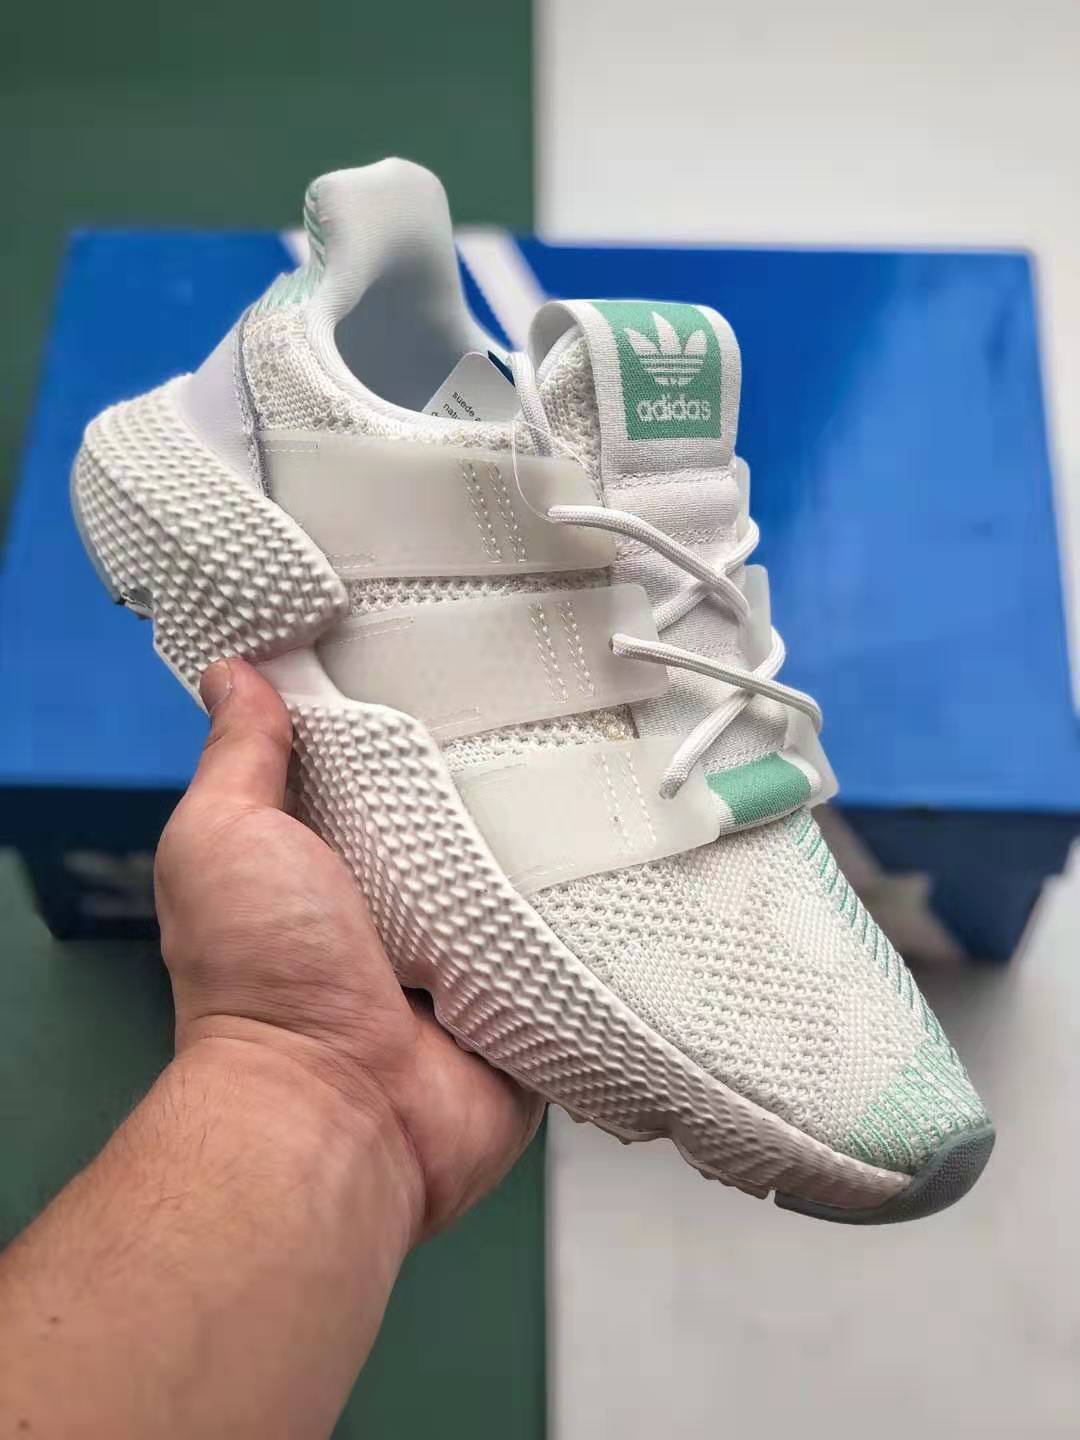 Adidas Prophere 'White Green' Sneakers | Latest Originals Release